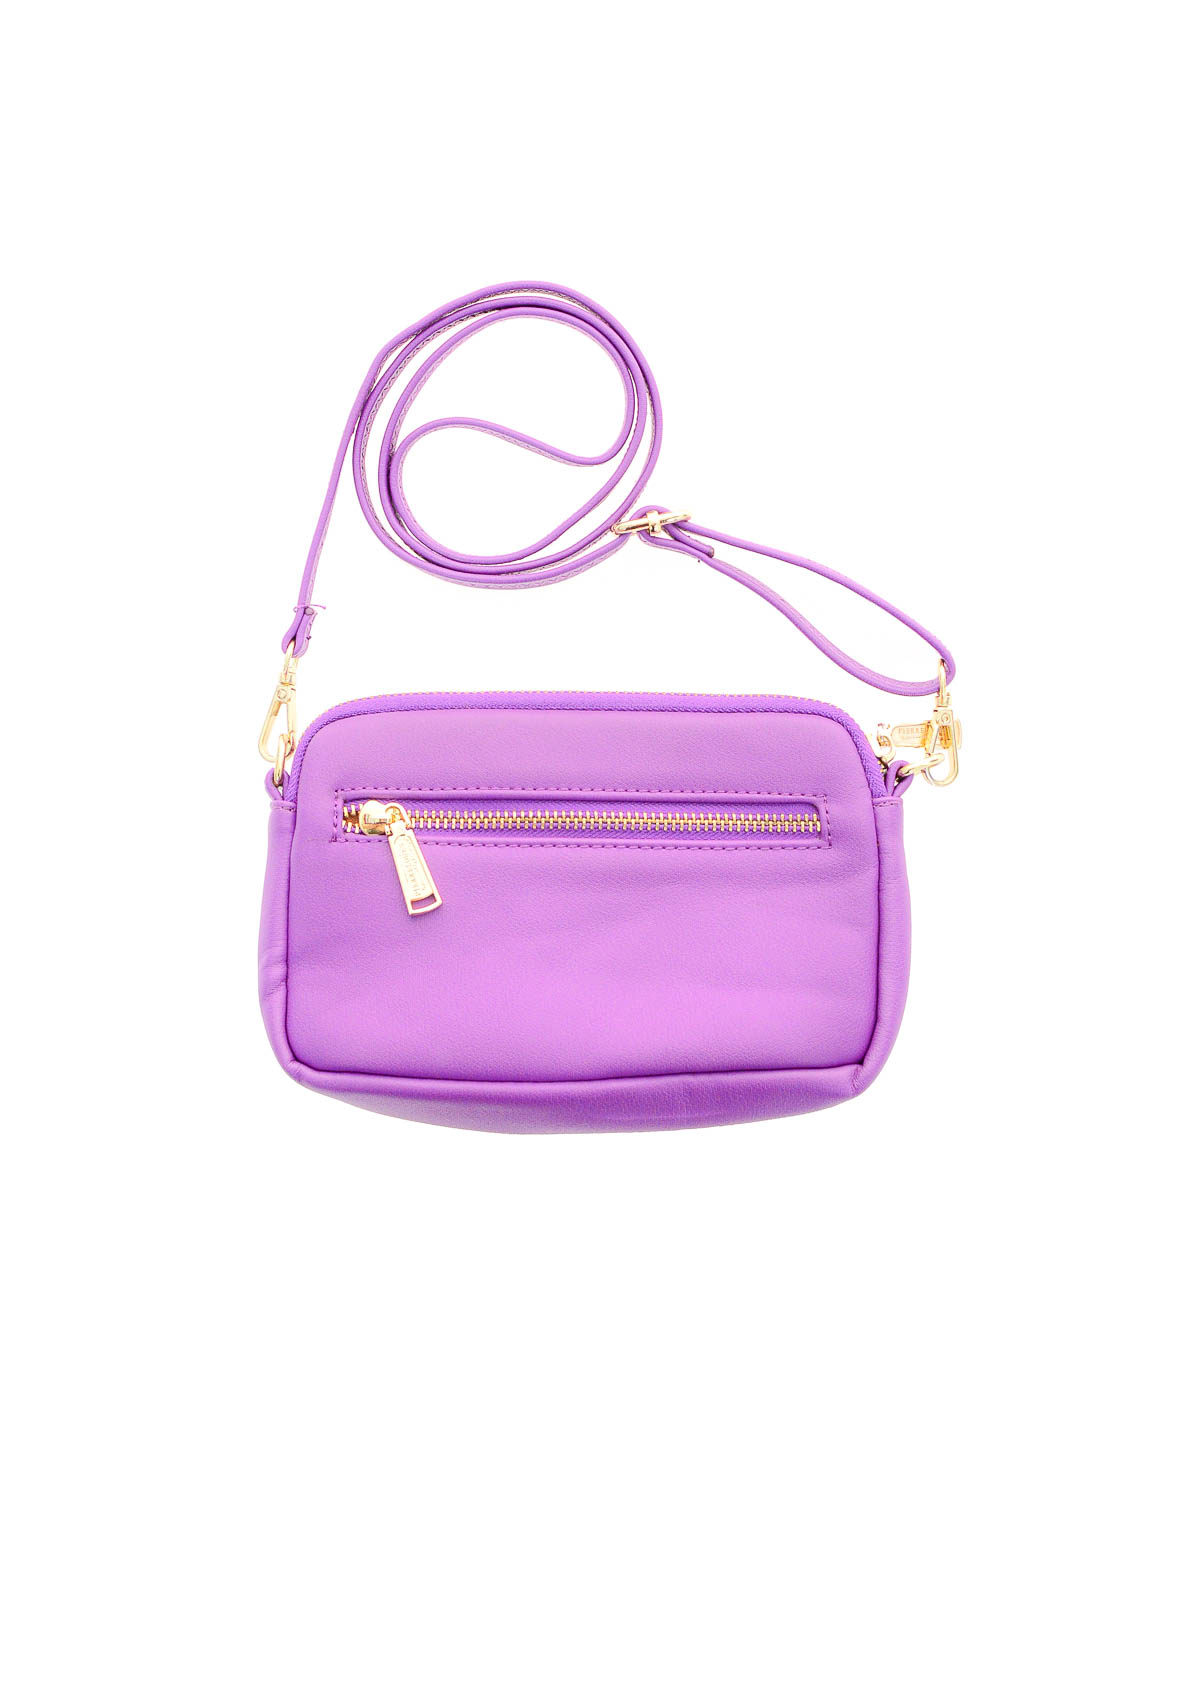 Women's bag - Forever Young - 1